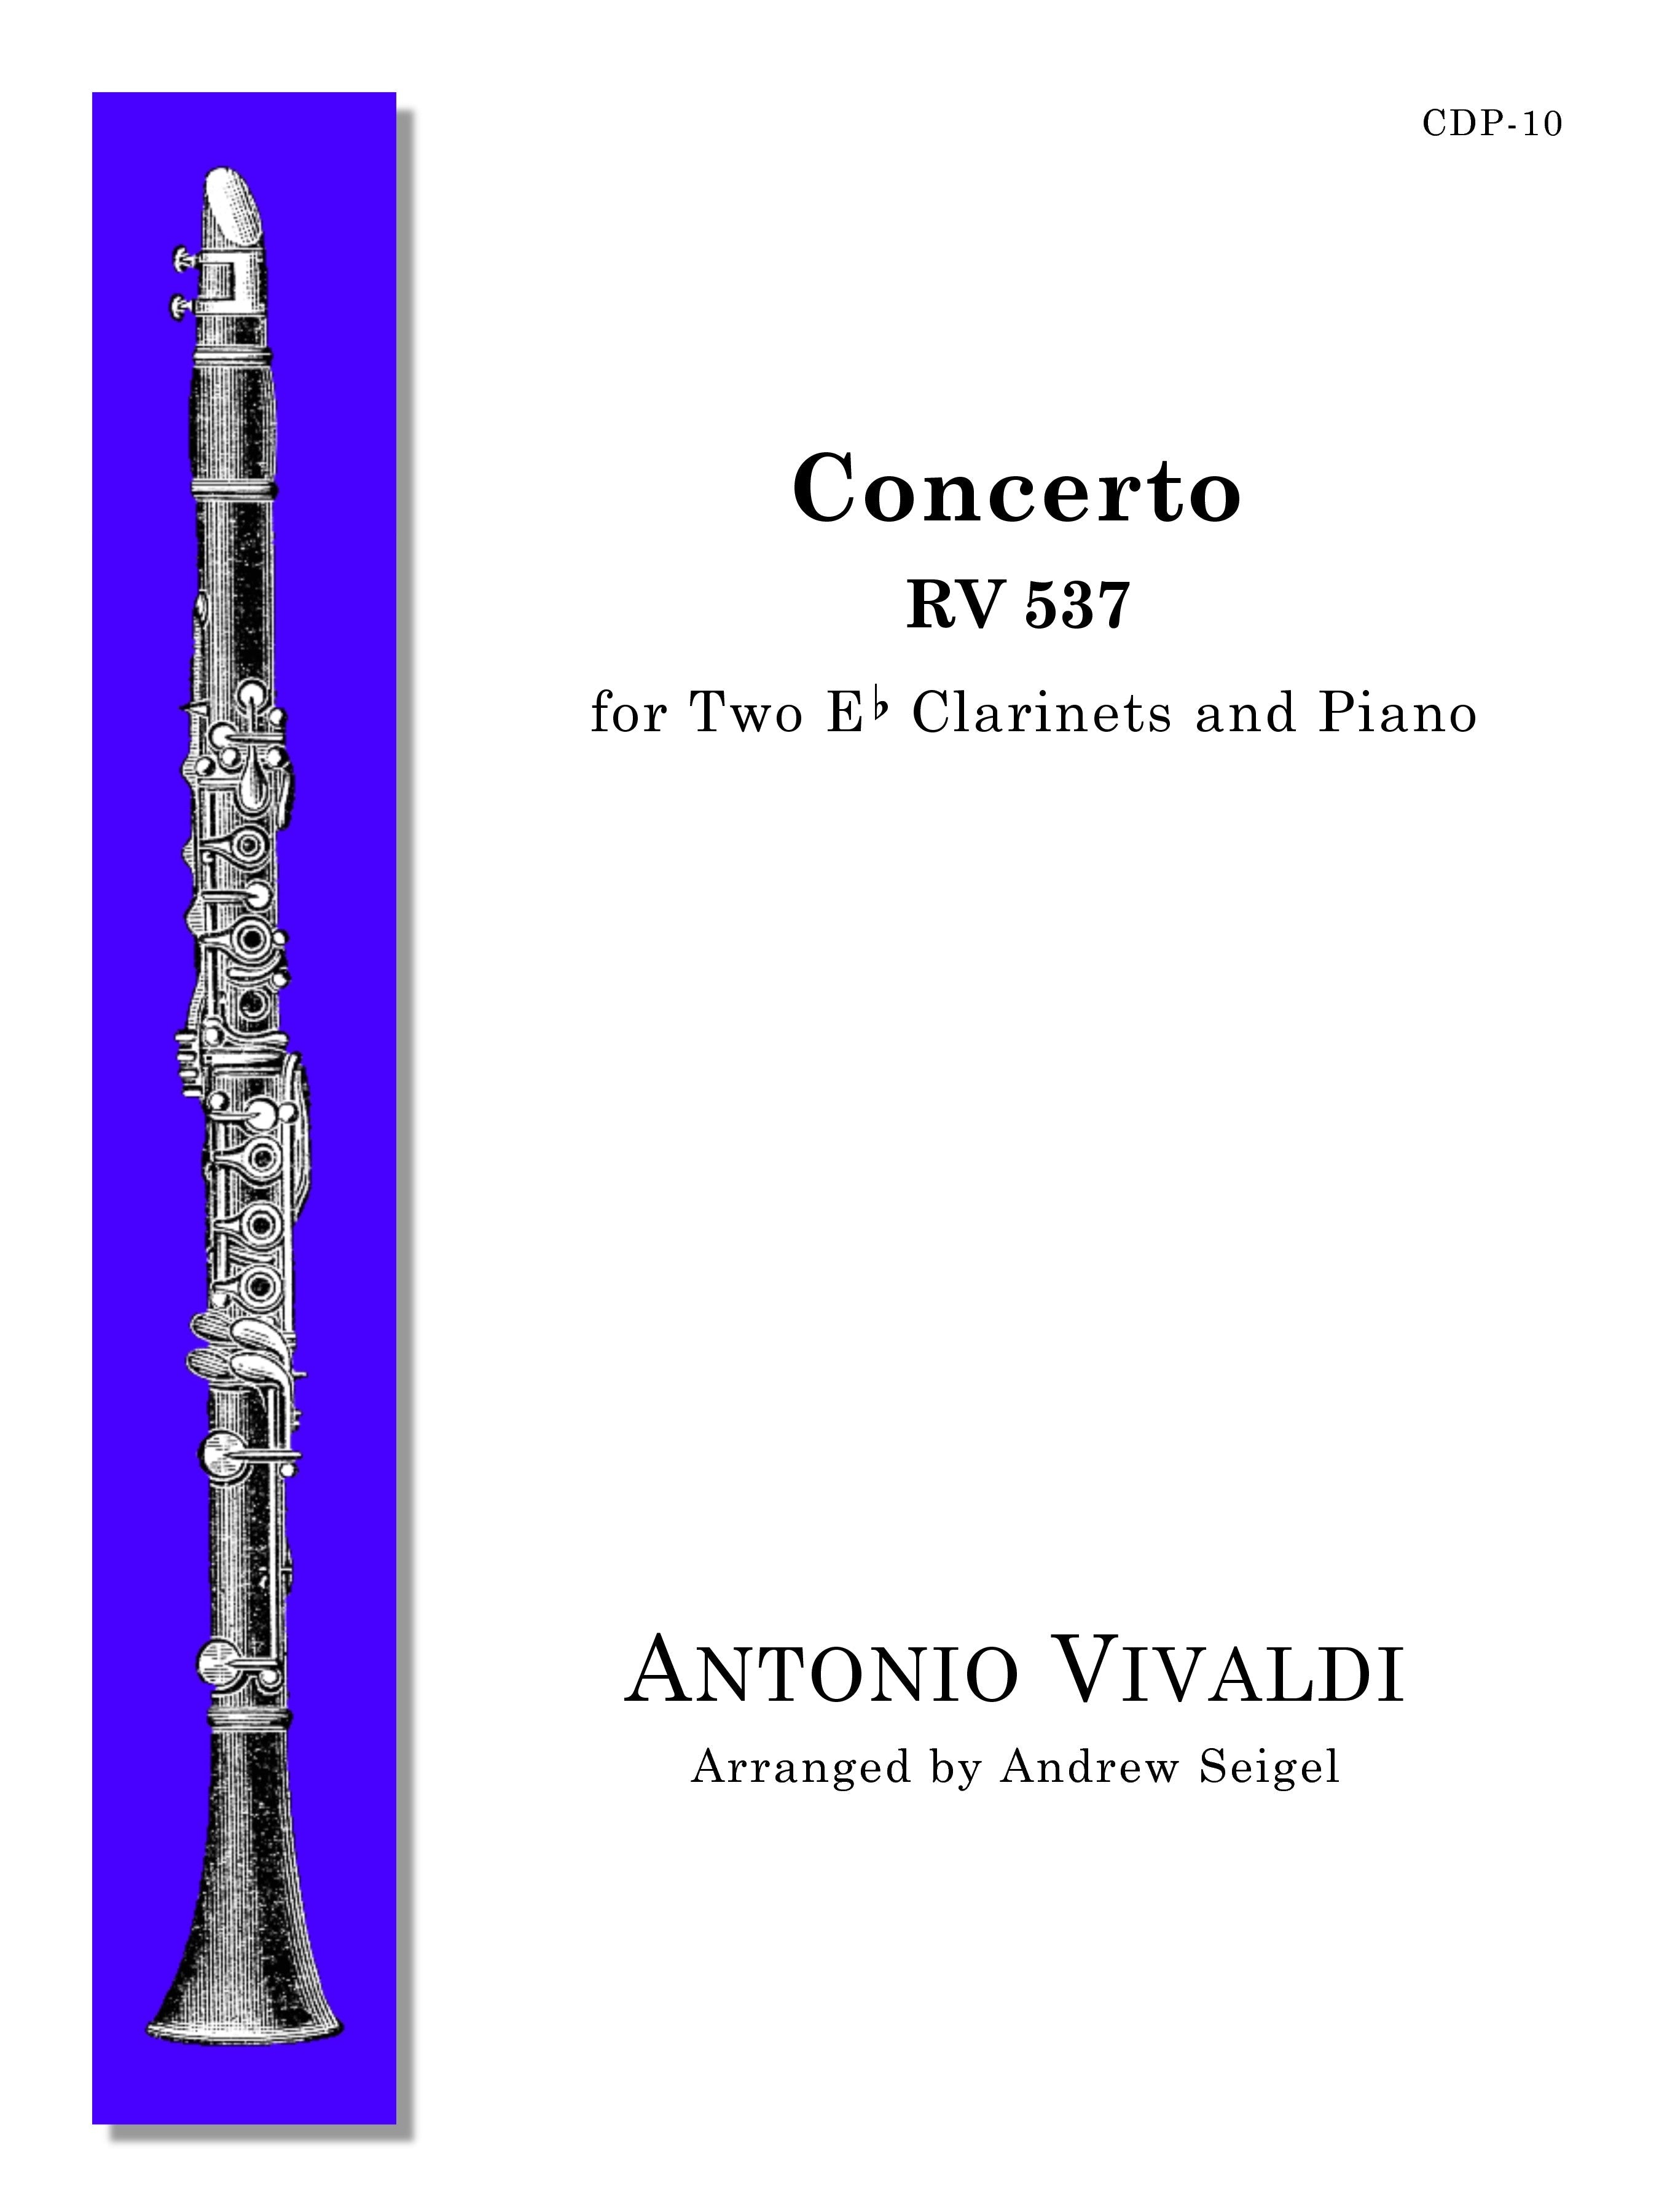 Vivaldi (arr. Andrew Seigel) - Concerto for Two E-flat Clarinets and Piano